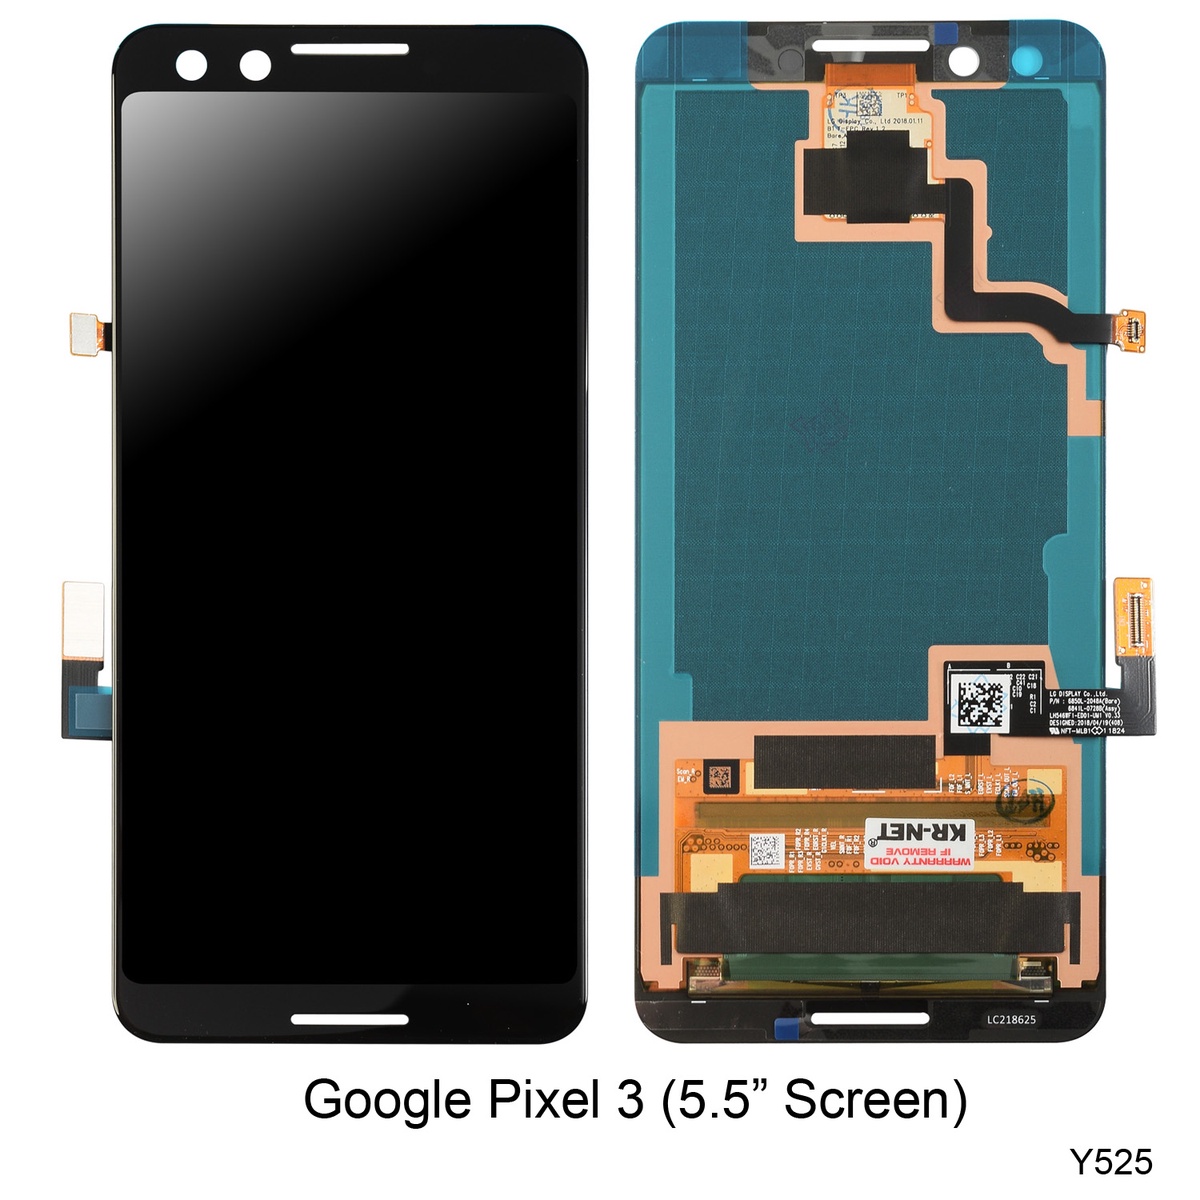 Pixel Perfection: Navigating the World of Google Pixel Parts